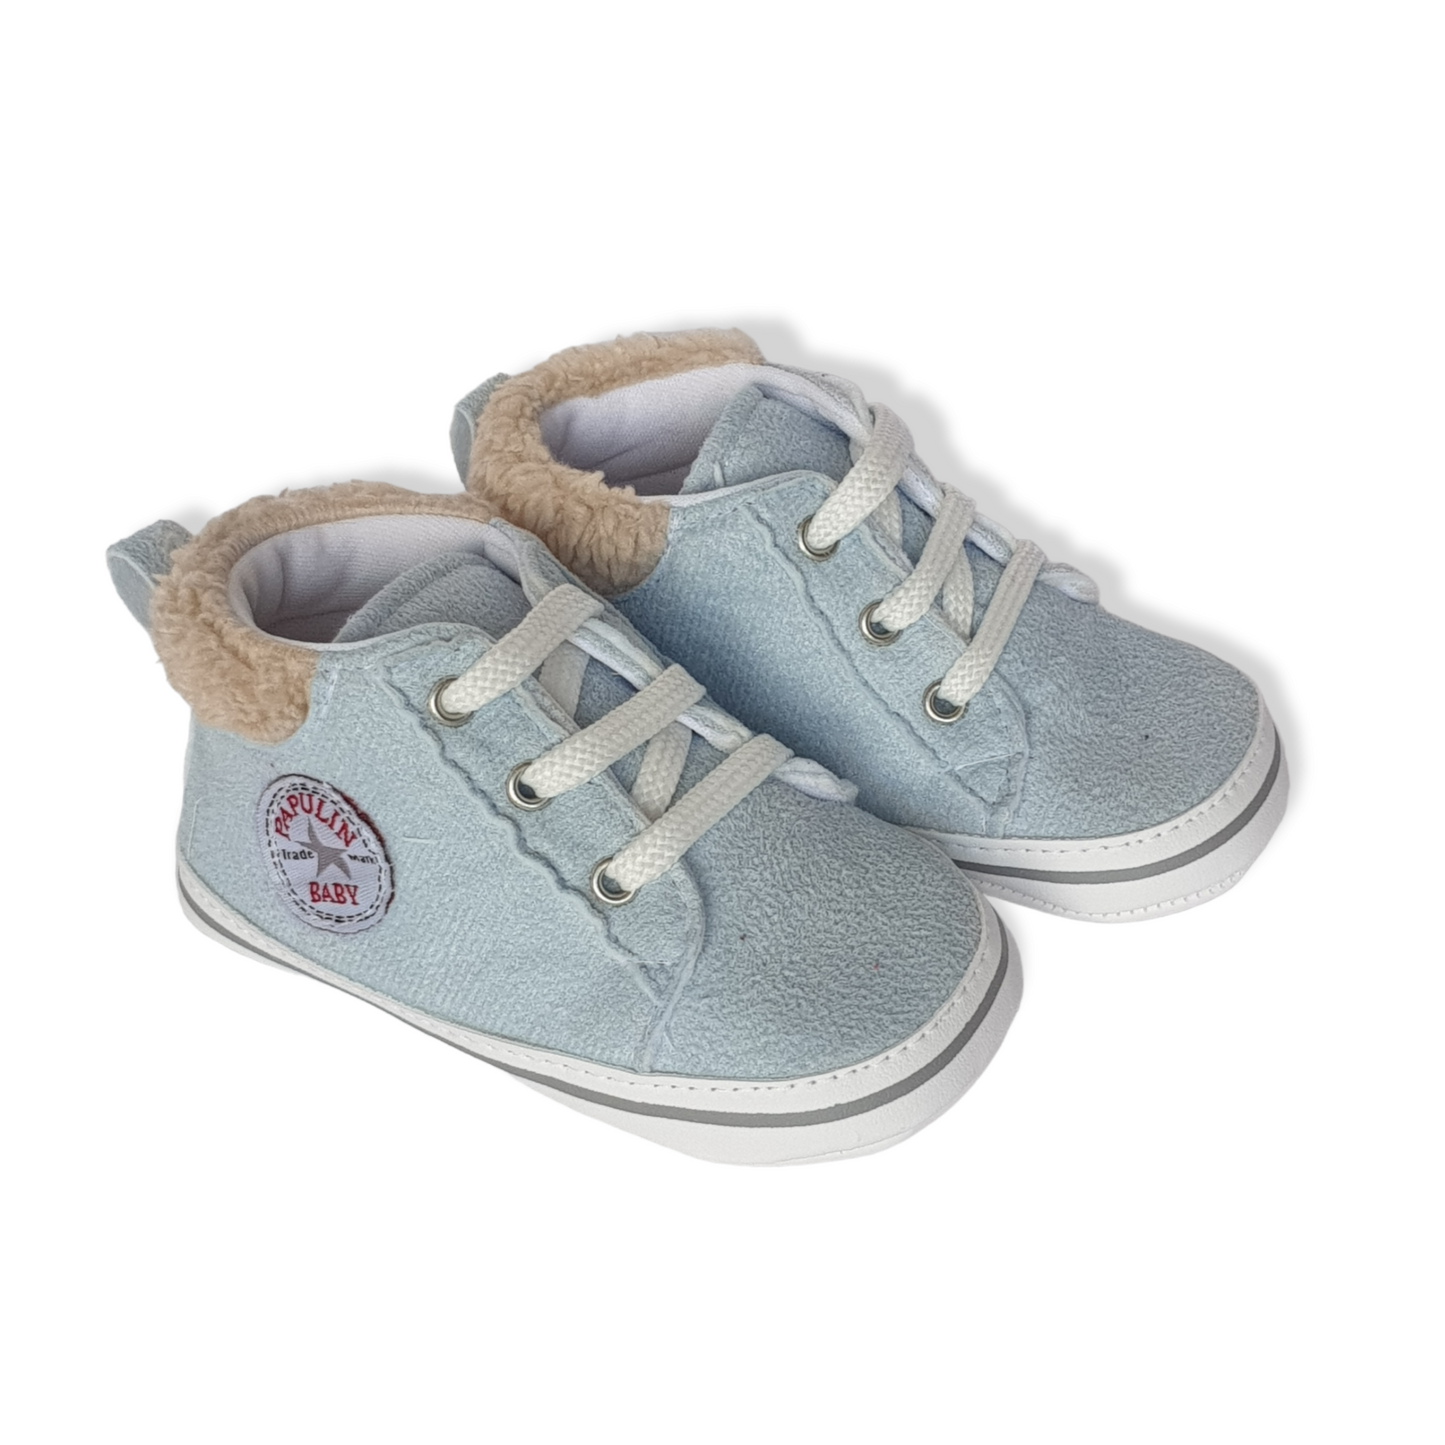 Ligh Blue Sneakers Baby Shoes-Baby shoe, Boots, catshoes, catunisex, Light Blue, Shoe, Shoes, Sneakers-Papulin-[Too Twee]-[Tootwee]-[baby]-[newborn]-[clothes]-[essentials]-[toys]-[Lebanon]